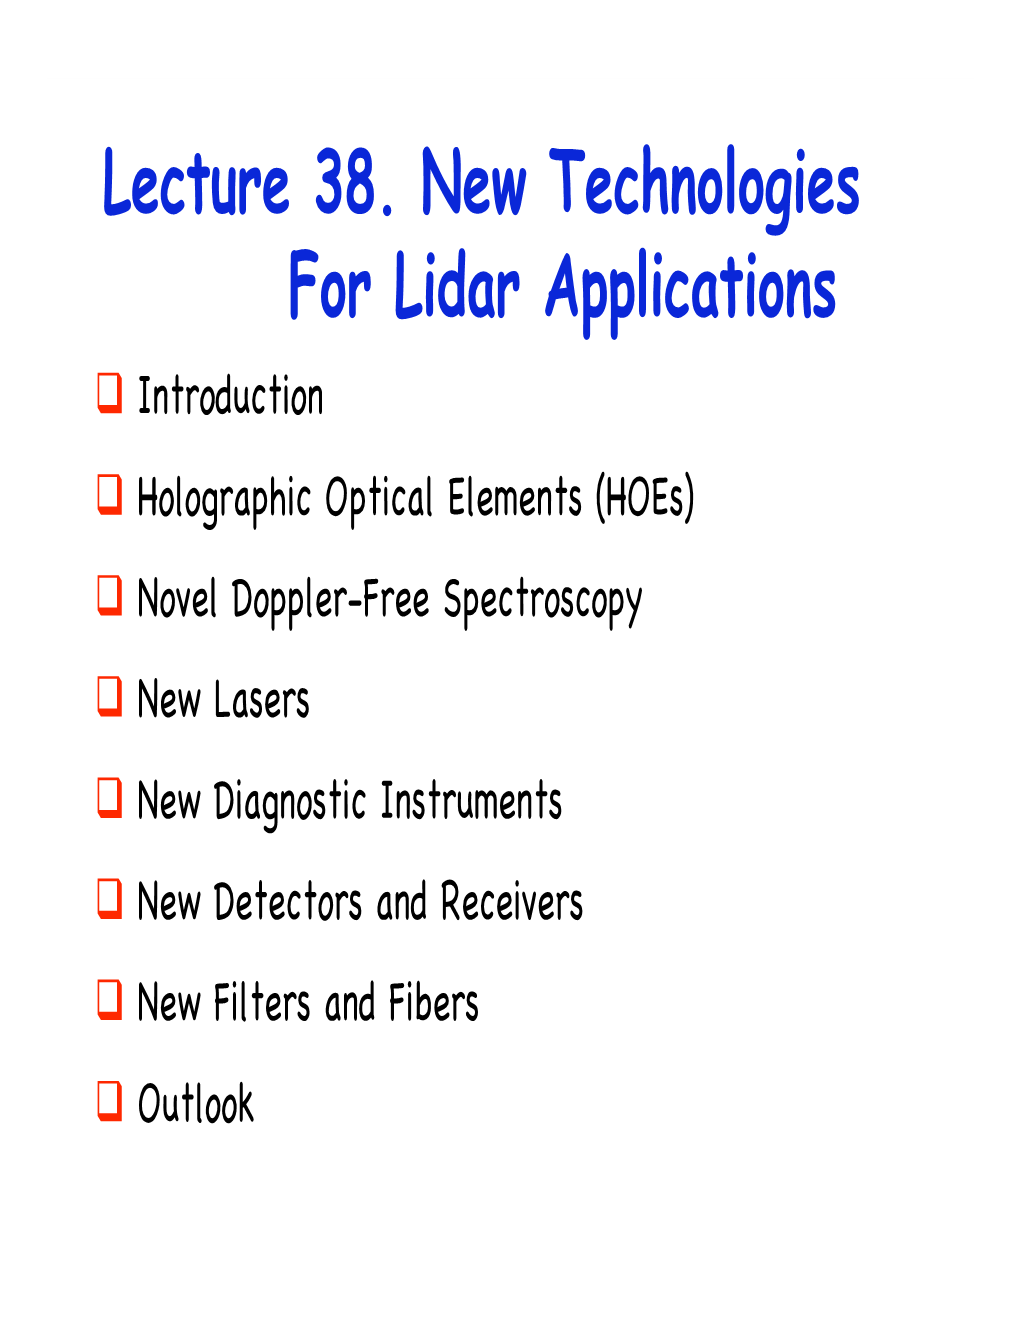 Lecture 38. New Technologies for Lidar Applications